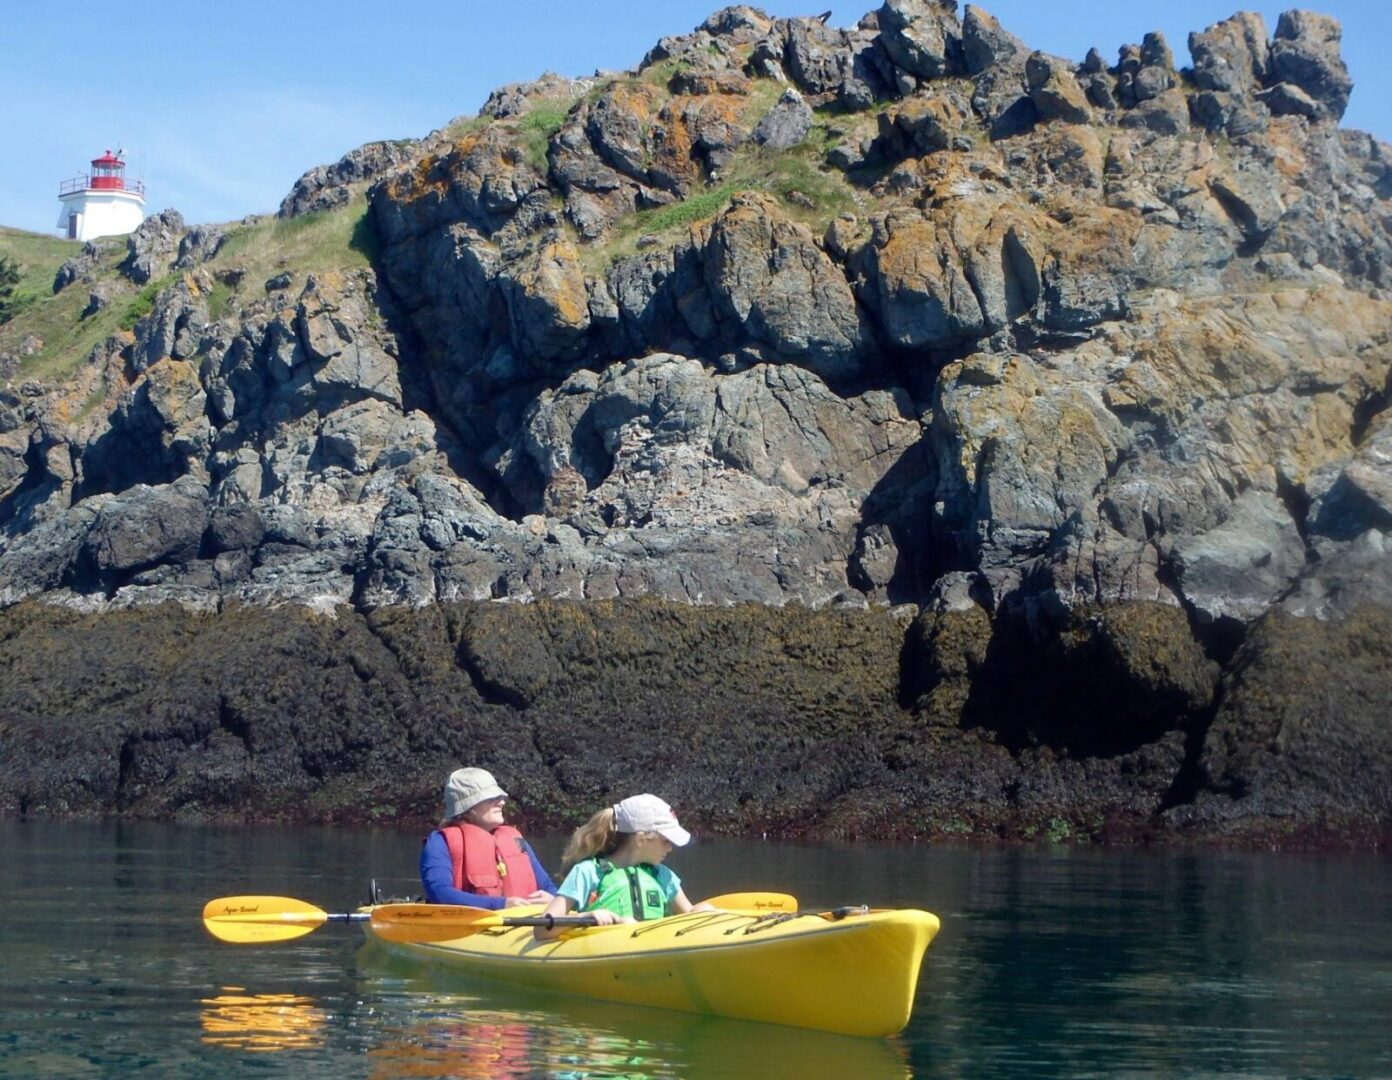 Two people paddling a yellow kayak in the water near a lighthouse.